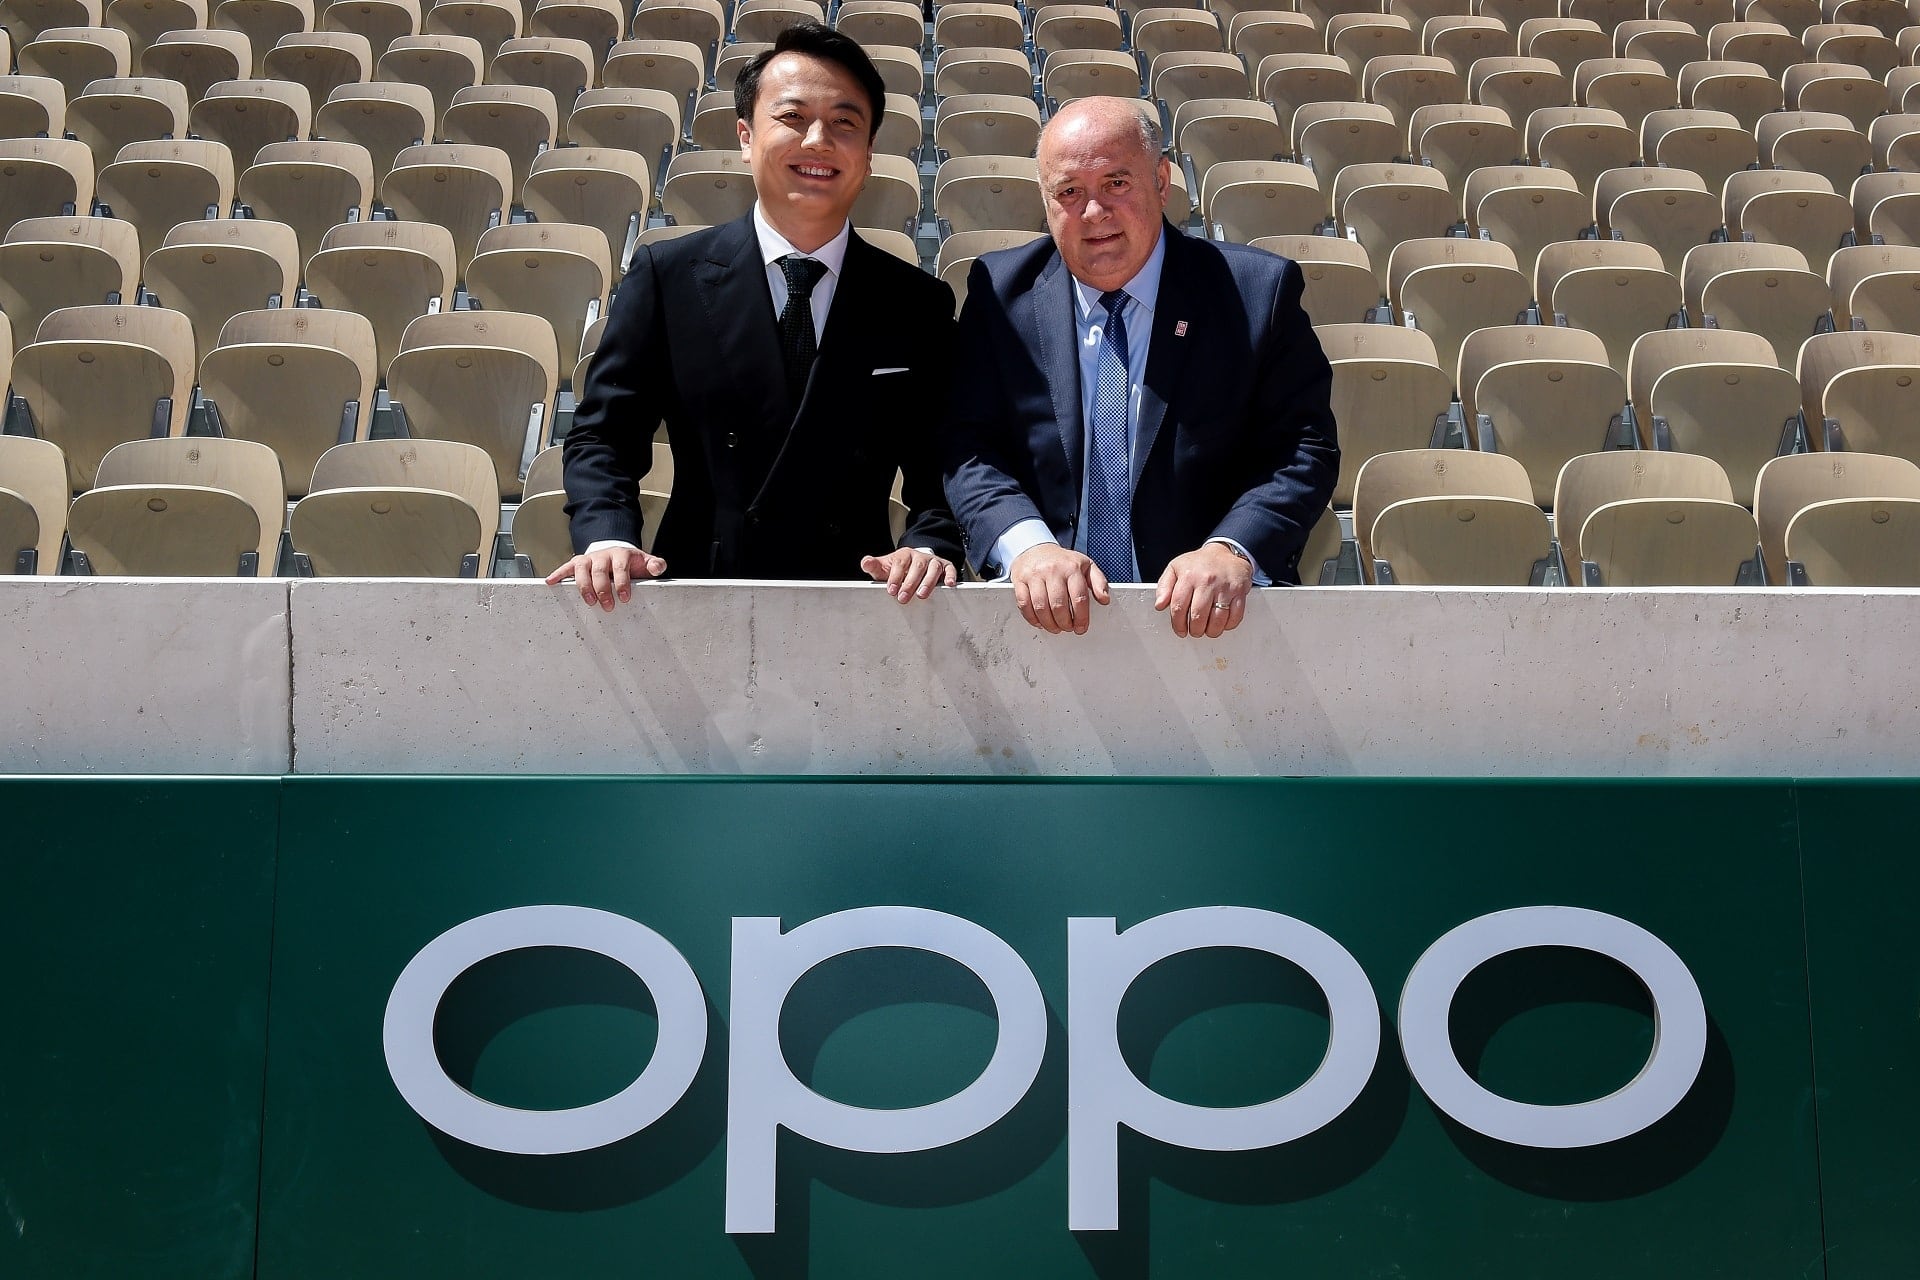 OPPO Becomes Premium Partner and Official Smartphone of Roland-Garros and of the Rolex Paris Masters